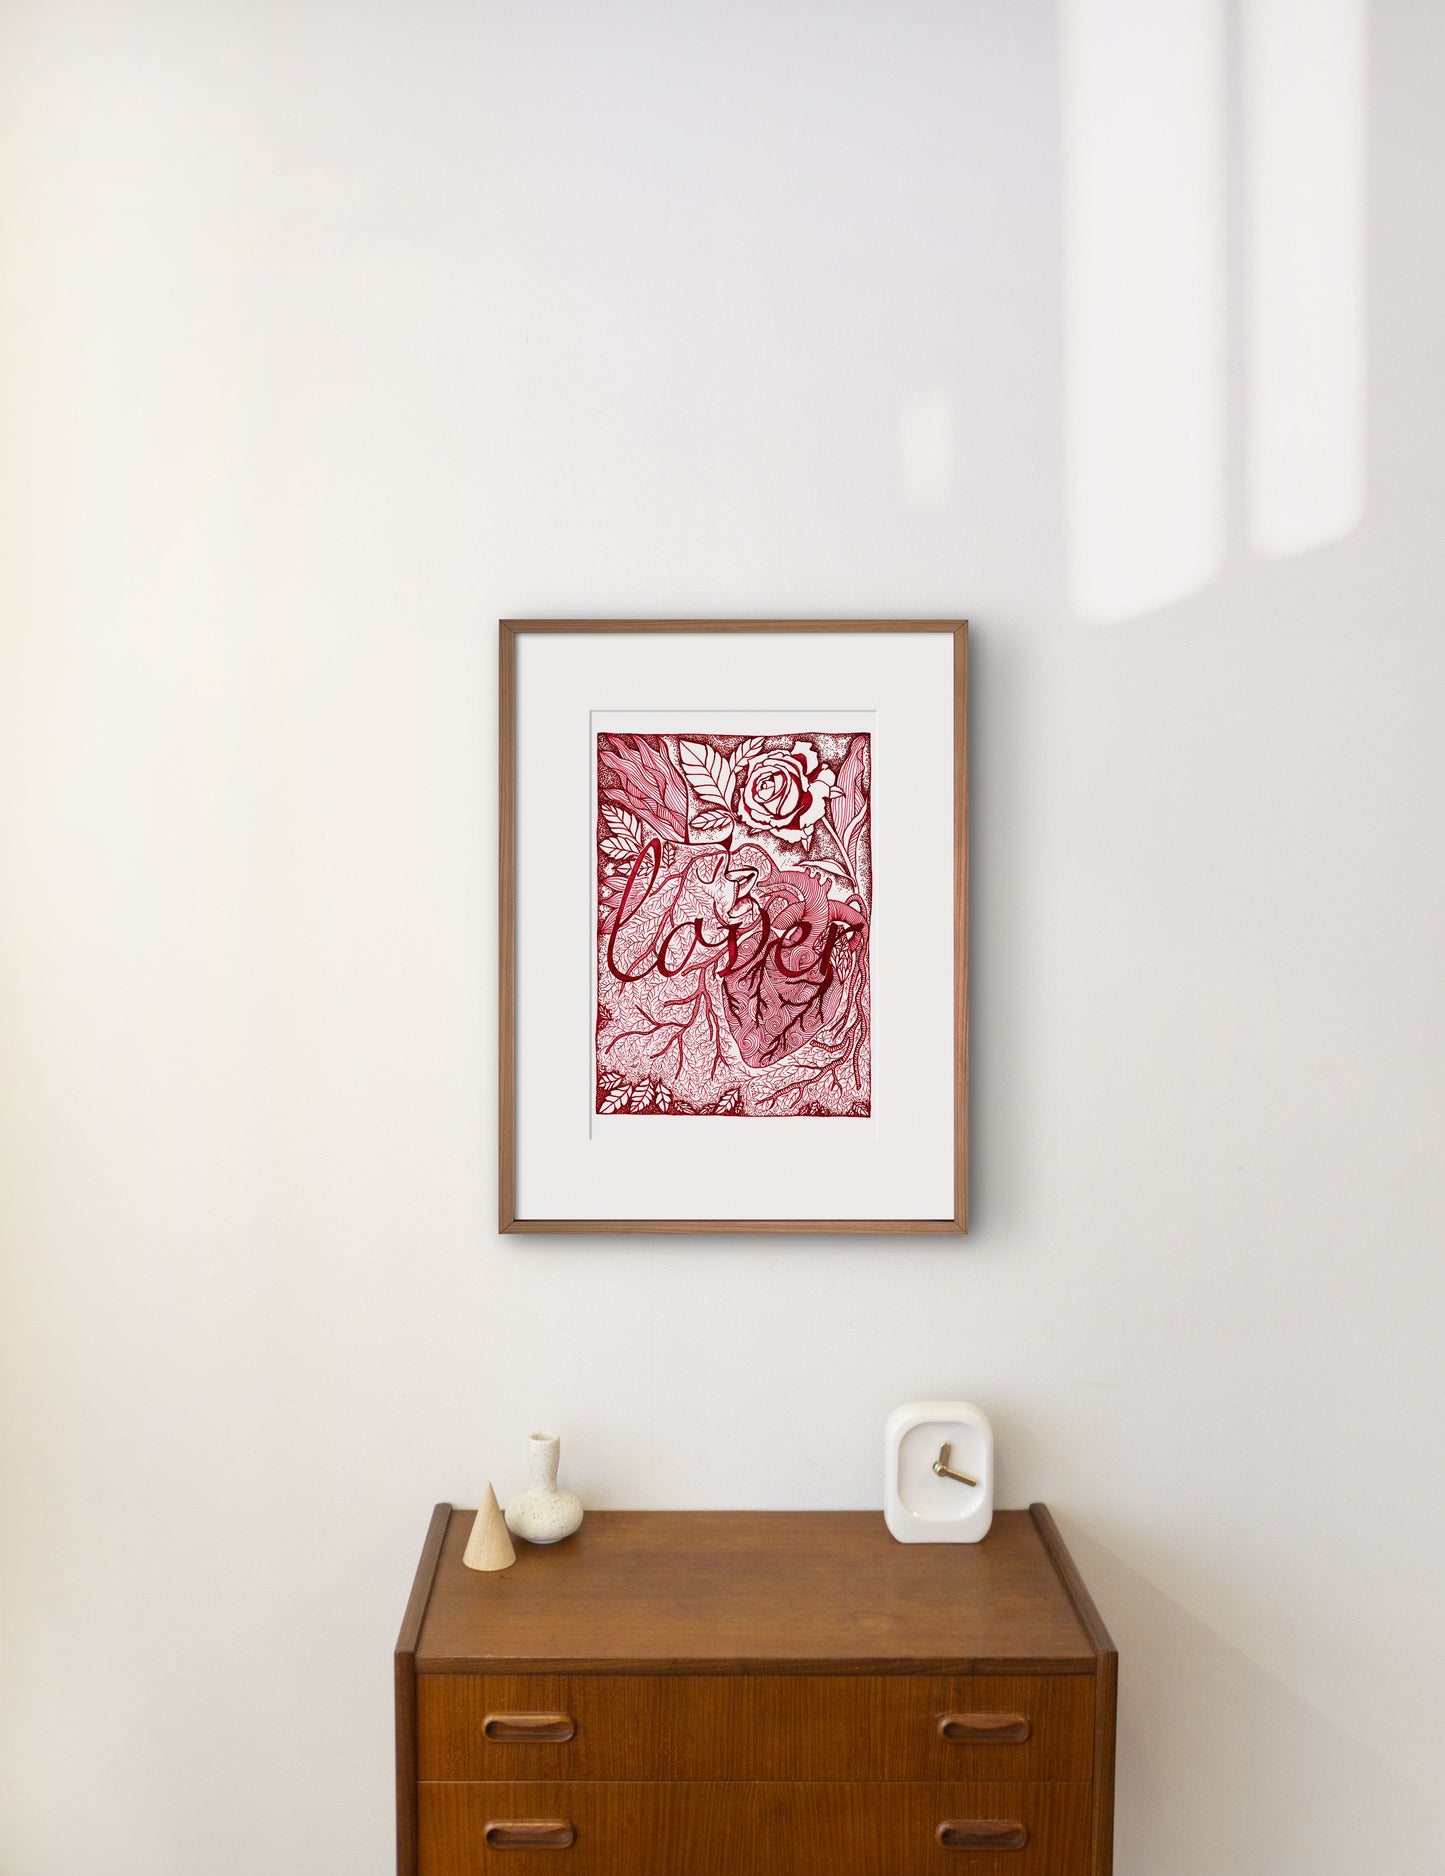 Lover written in the middle in red ink, behind drawing of pattern, biological heart, leaves, roots, and the kiss of two lips kissing each other, laurateodoriart